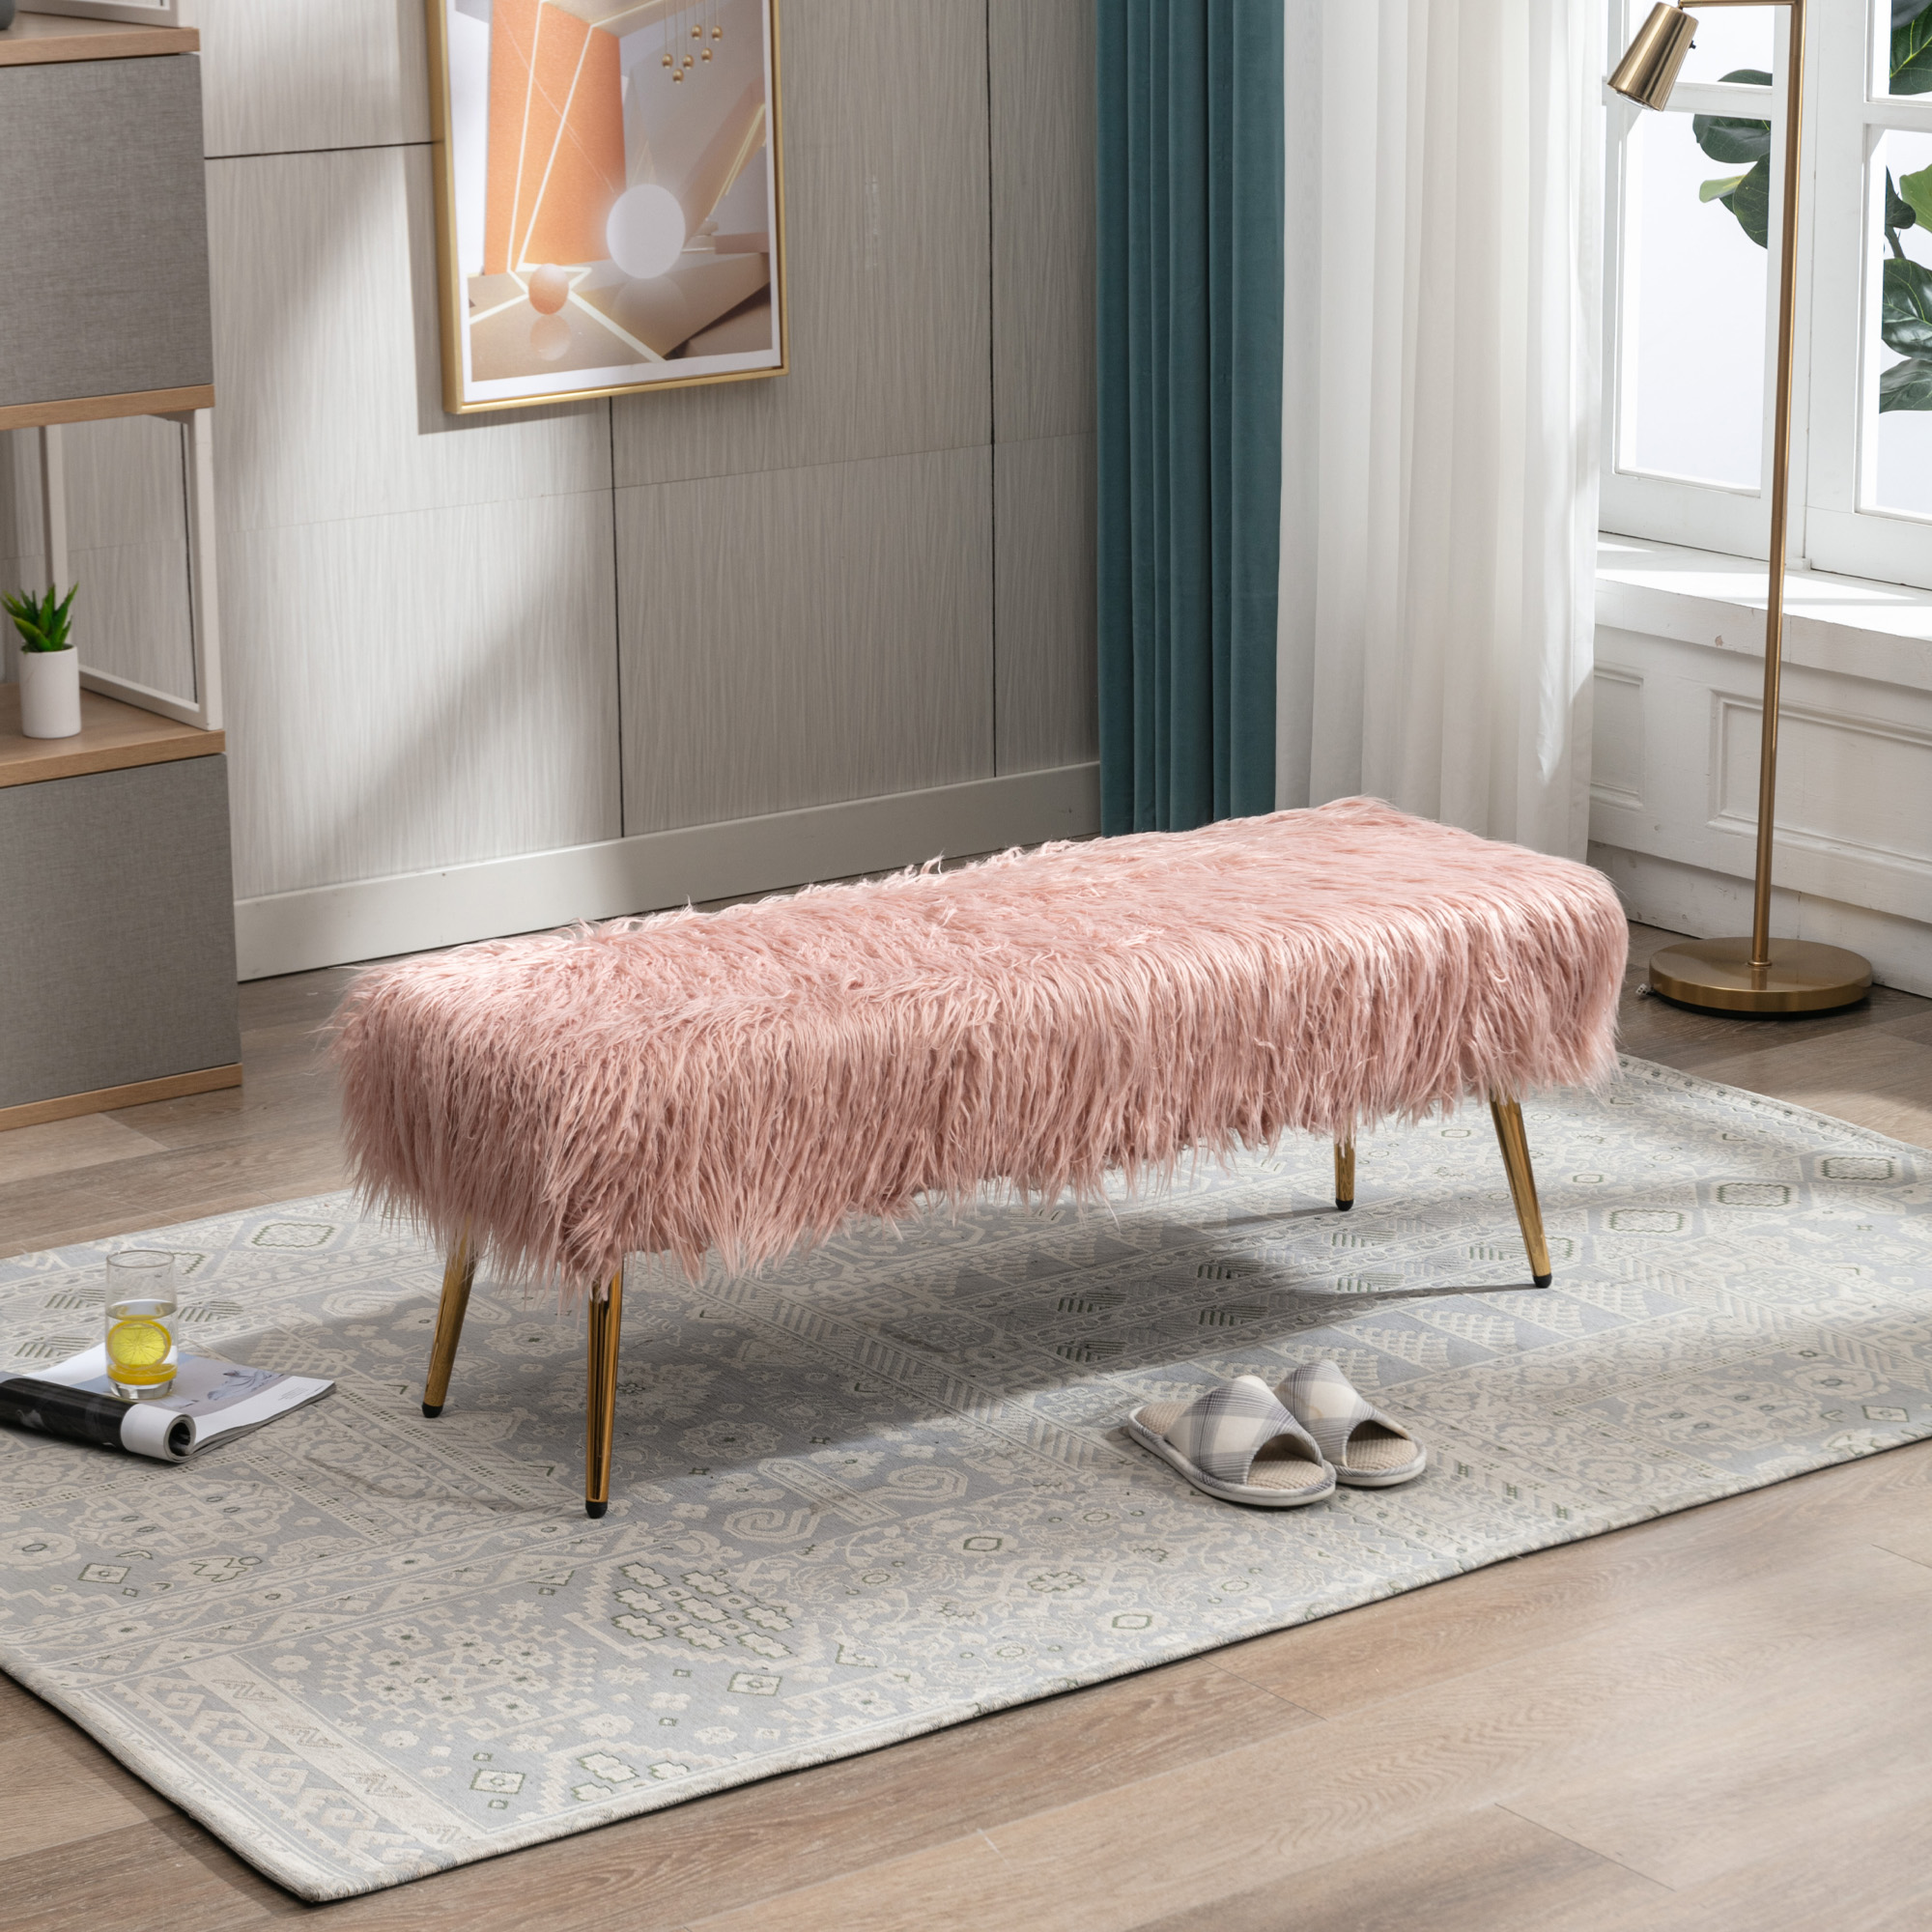 HengMing Faux Fur Plush Ottoman Bench, Modern Fluffy Upholstered Bench for Entryway Dining Room Living Room Bedroom, Pink